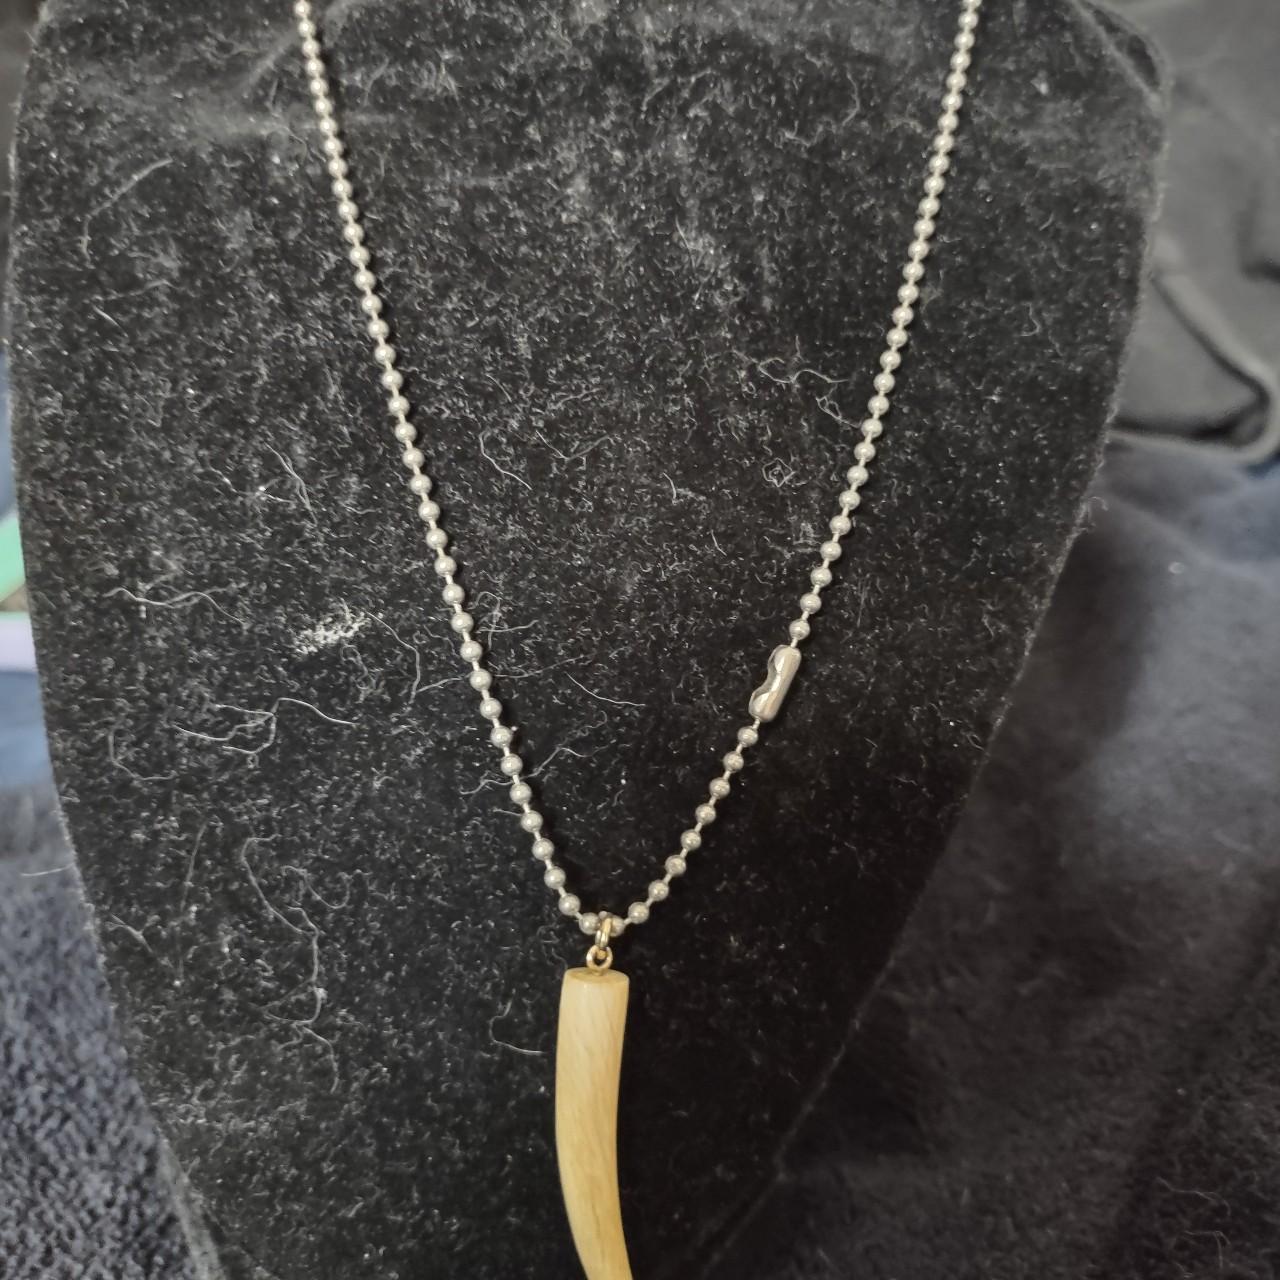 Saber Tooth Pendant on Chain | AMiGAZ Attitude Approved Accessories